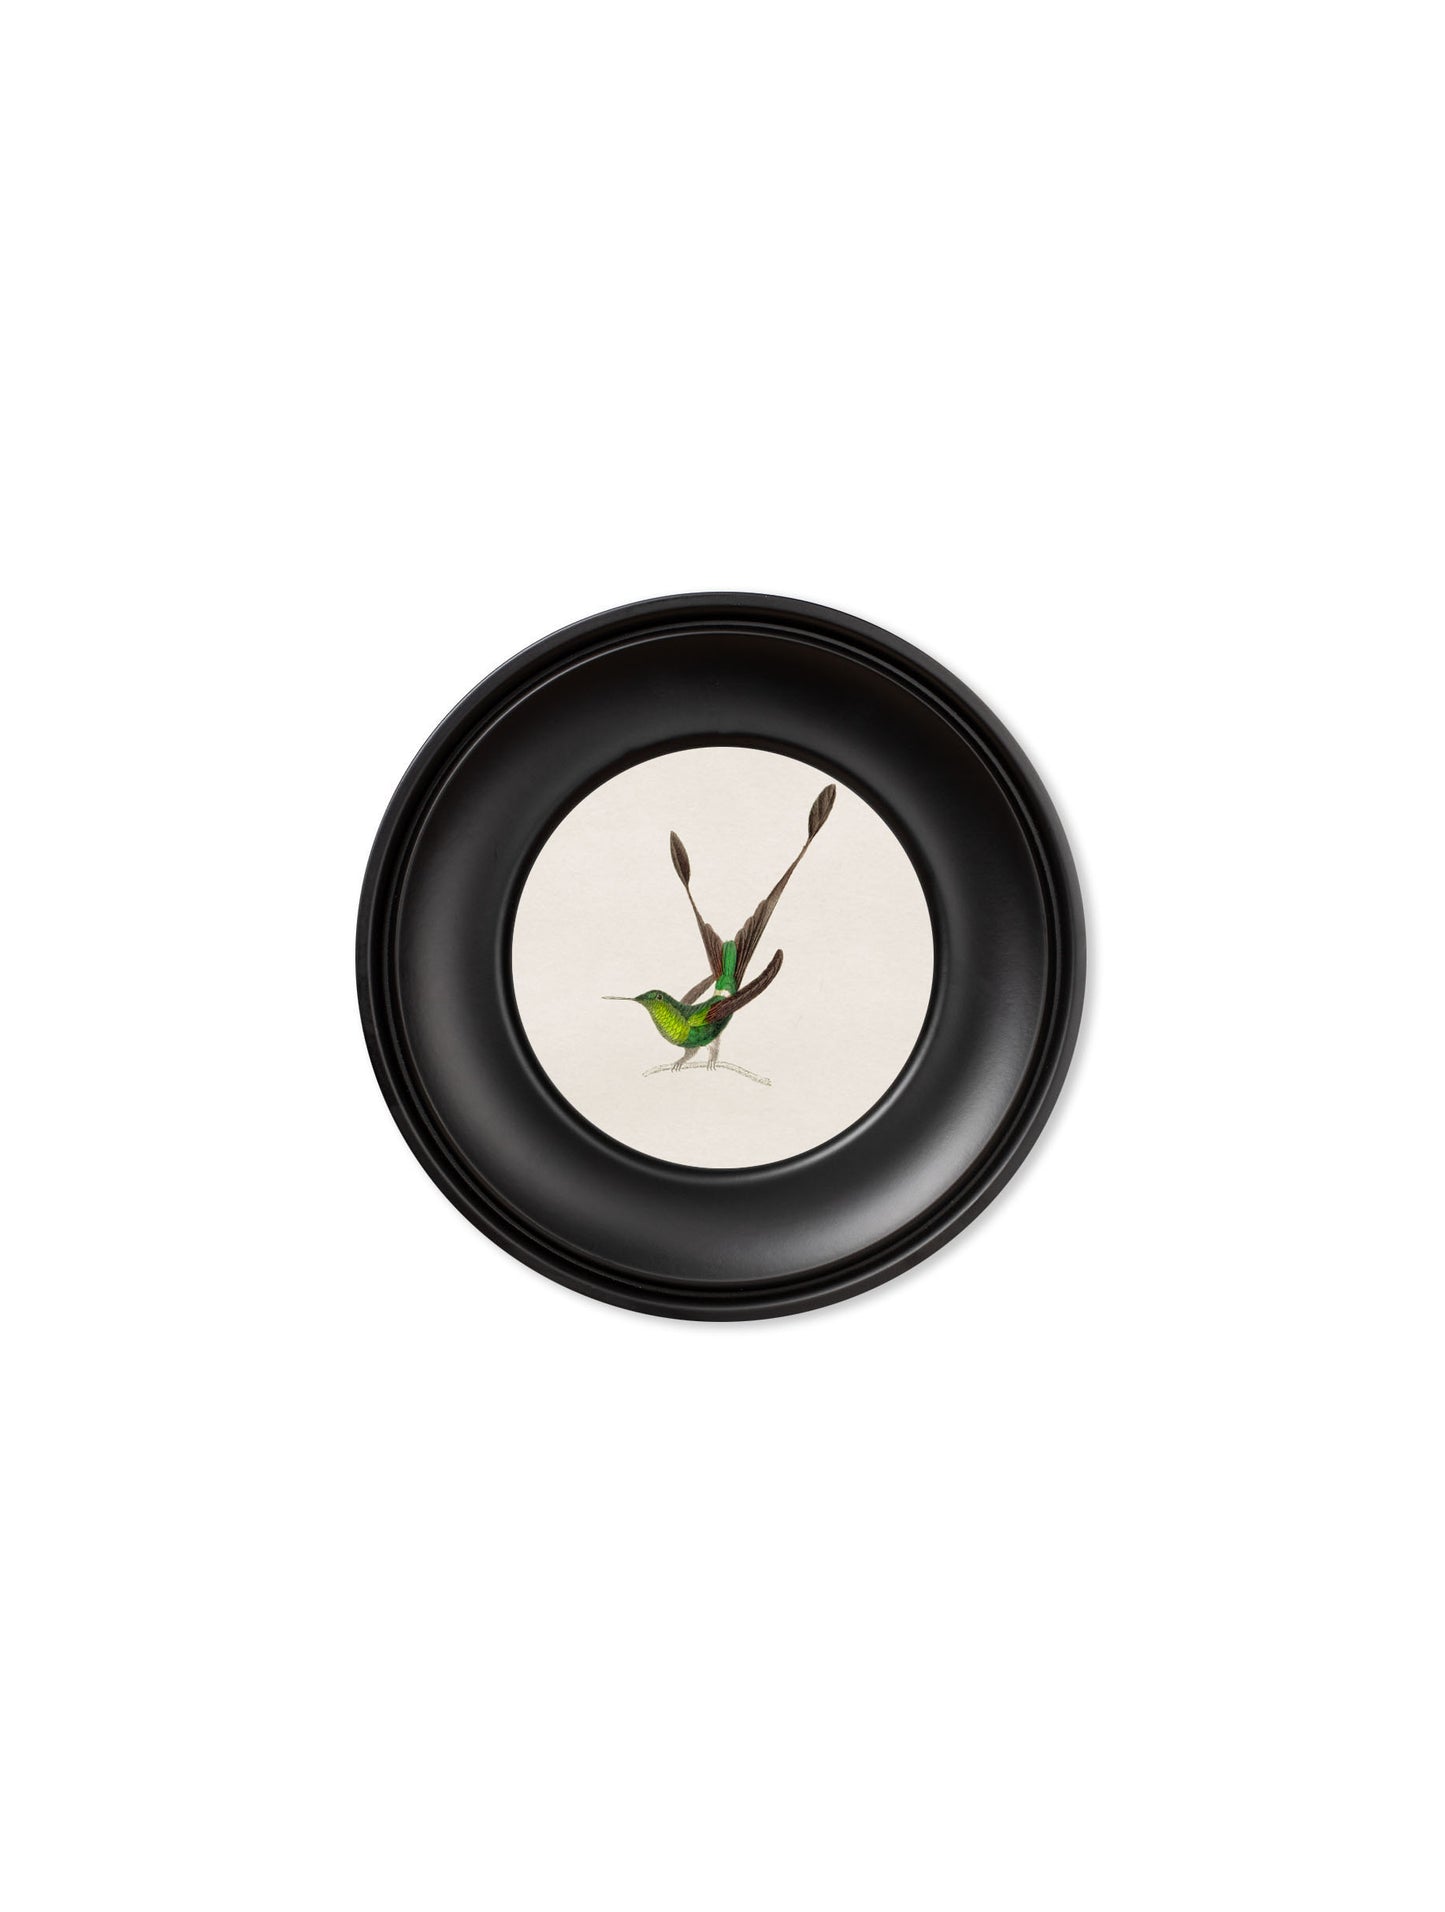 Collection of Hummingbirds in Small Round Frames